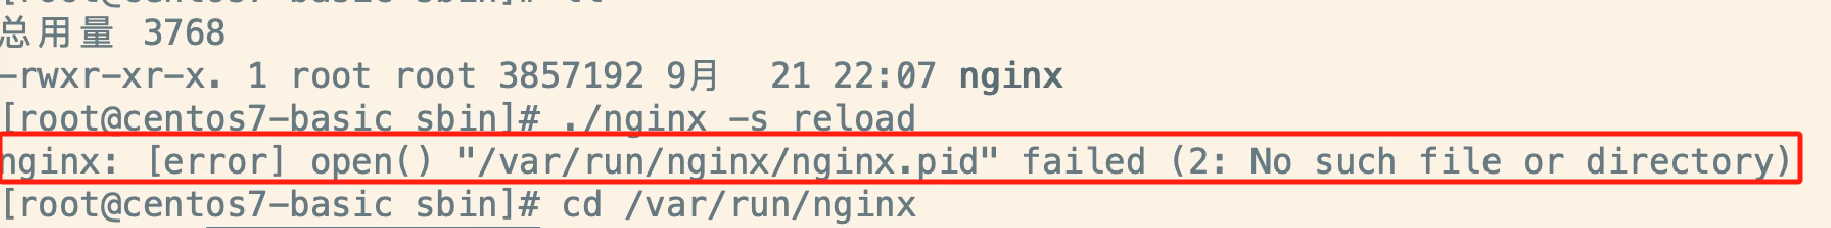 4.nginx.pid<span style='color:red;'>打开</span><span style='color:red;'>失败</span>以及<span style='color:red;'>失效</span><span style='color:red;'>的</span><span style='color:red;'>解决</span>方案